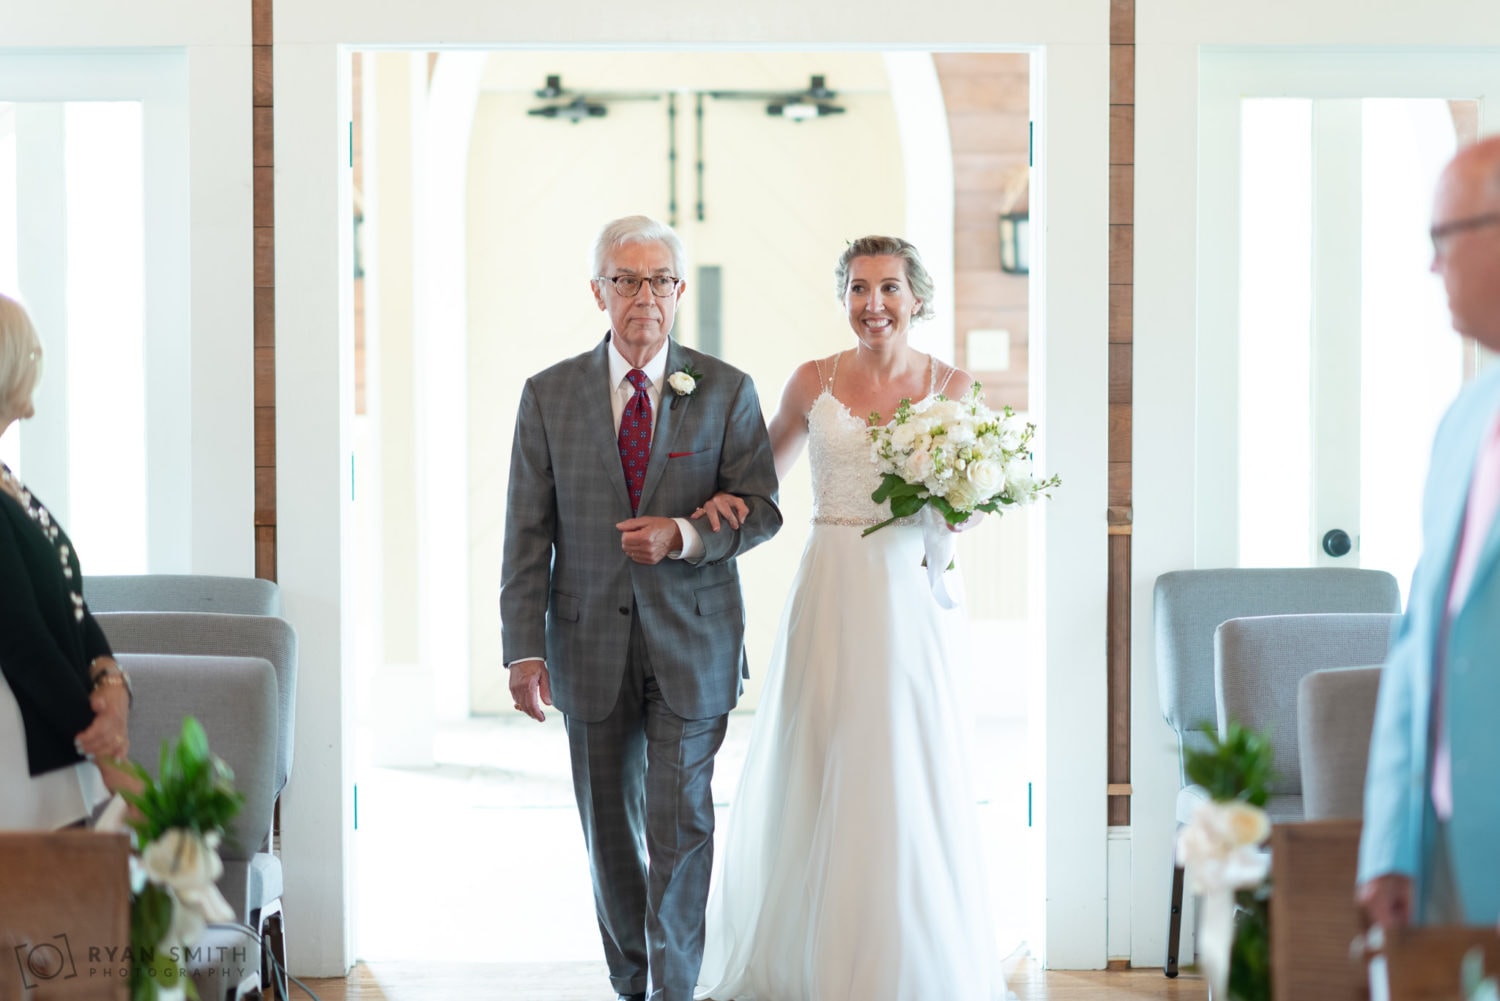 Bride and father walking down the isle Pawleys Island Community Chapel